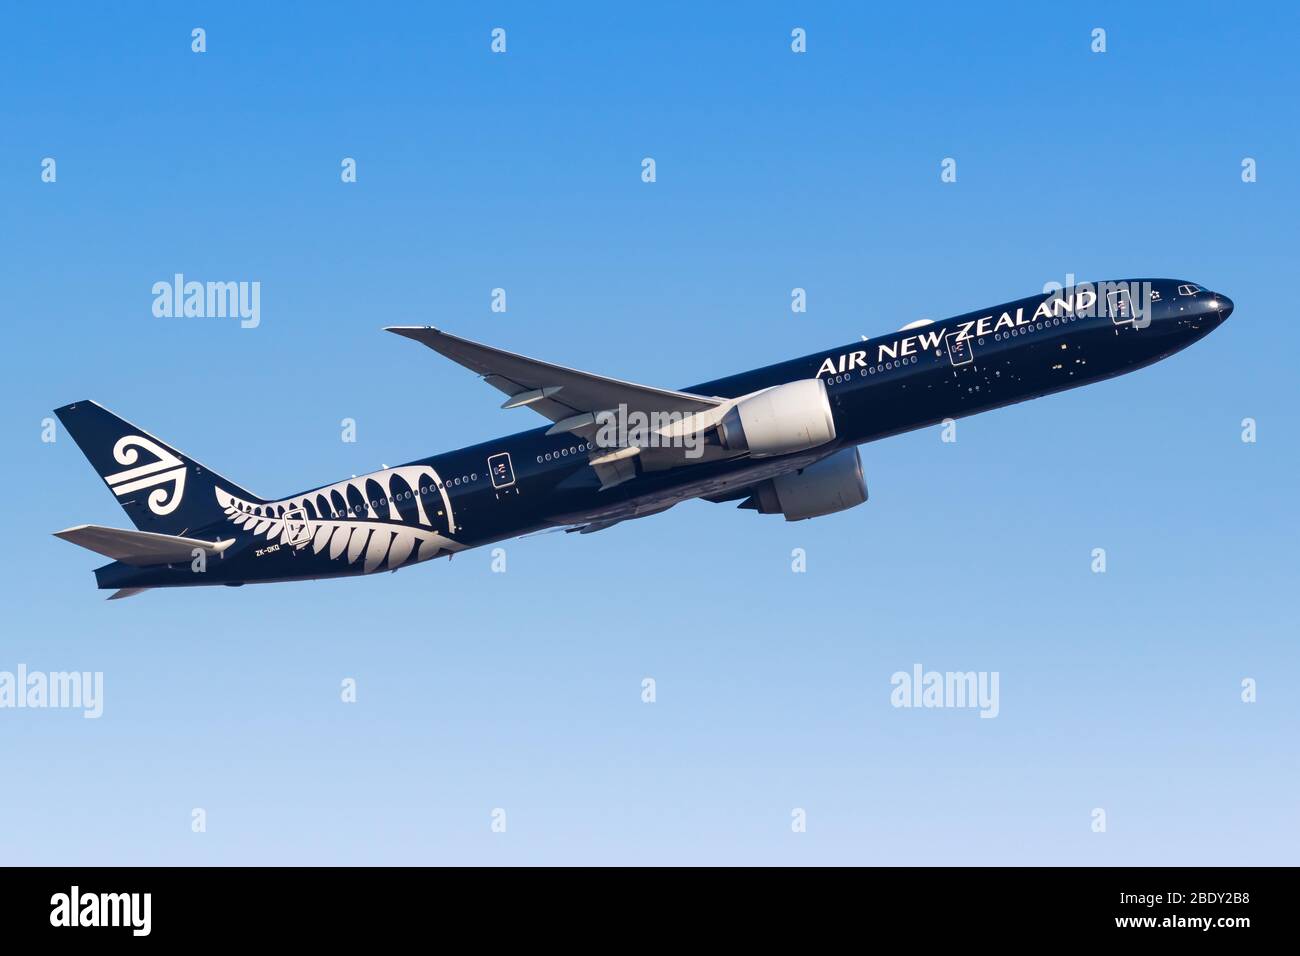 Frankfurt, Germany – April 7, 2020: Air New Zealand Boeing 777-300ER airplane at Frankfurt airport (FRA) in Germany. Boeing is an American aircraft ma Stock Photo